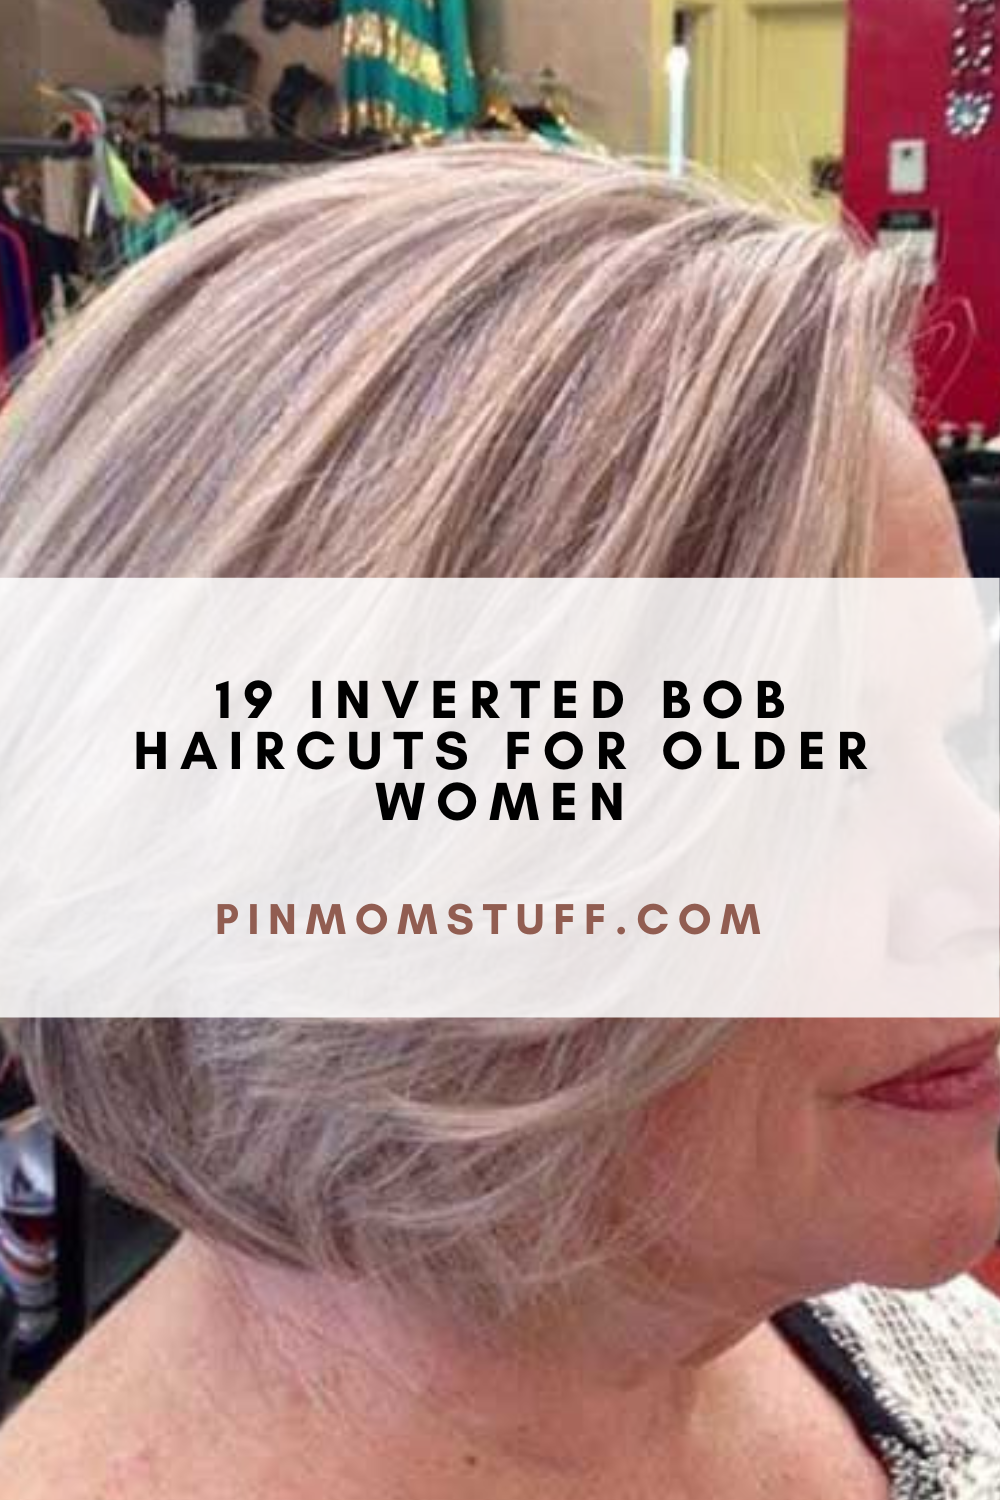 19 Inverted Bob Haircuts For Older Women